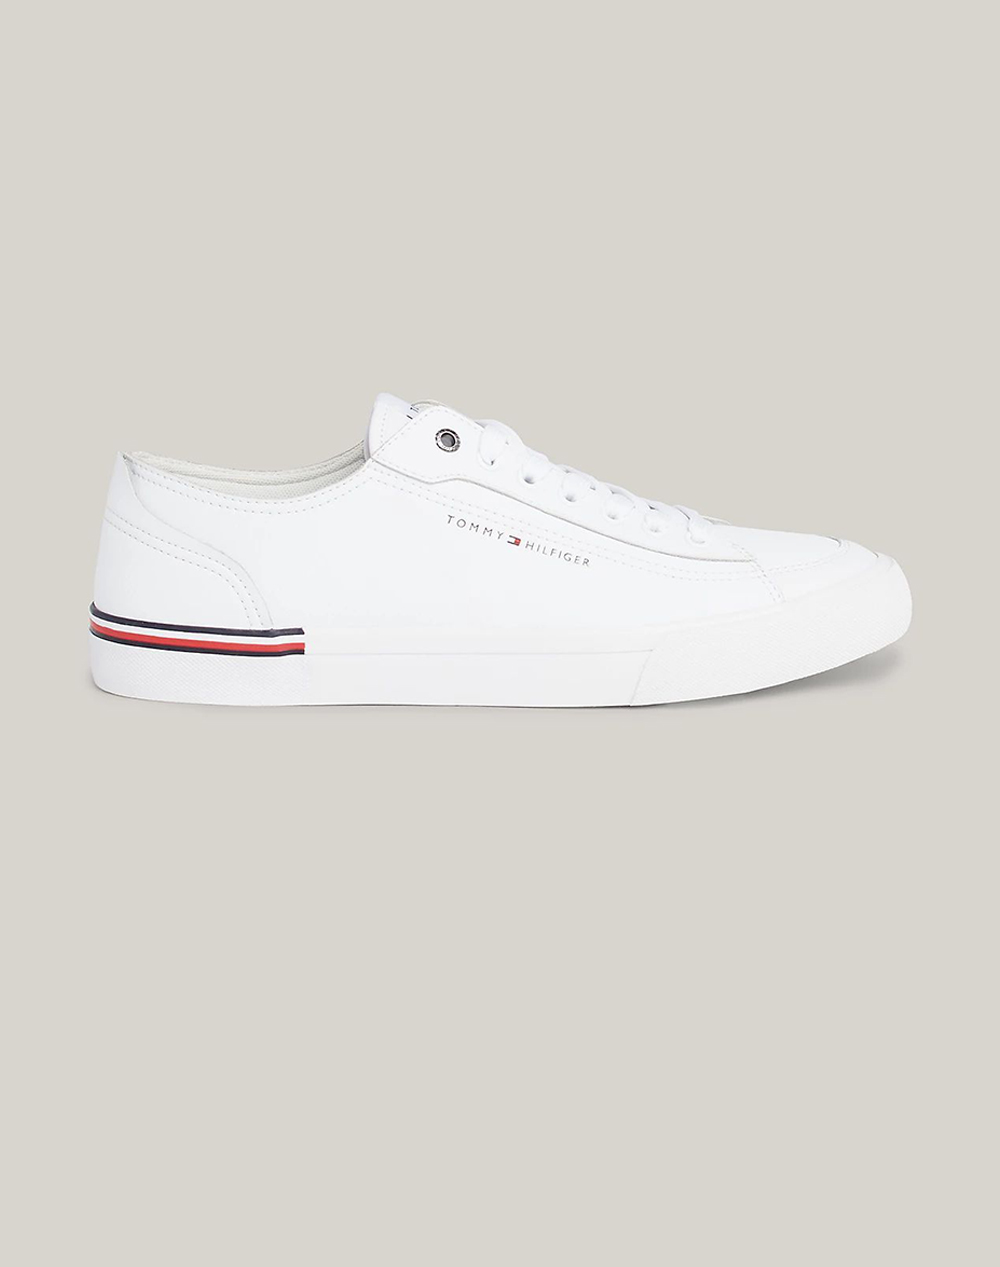 TOMMY HILFIGER CORPORATE VULC LEATHER FM0FM04953-YBS White